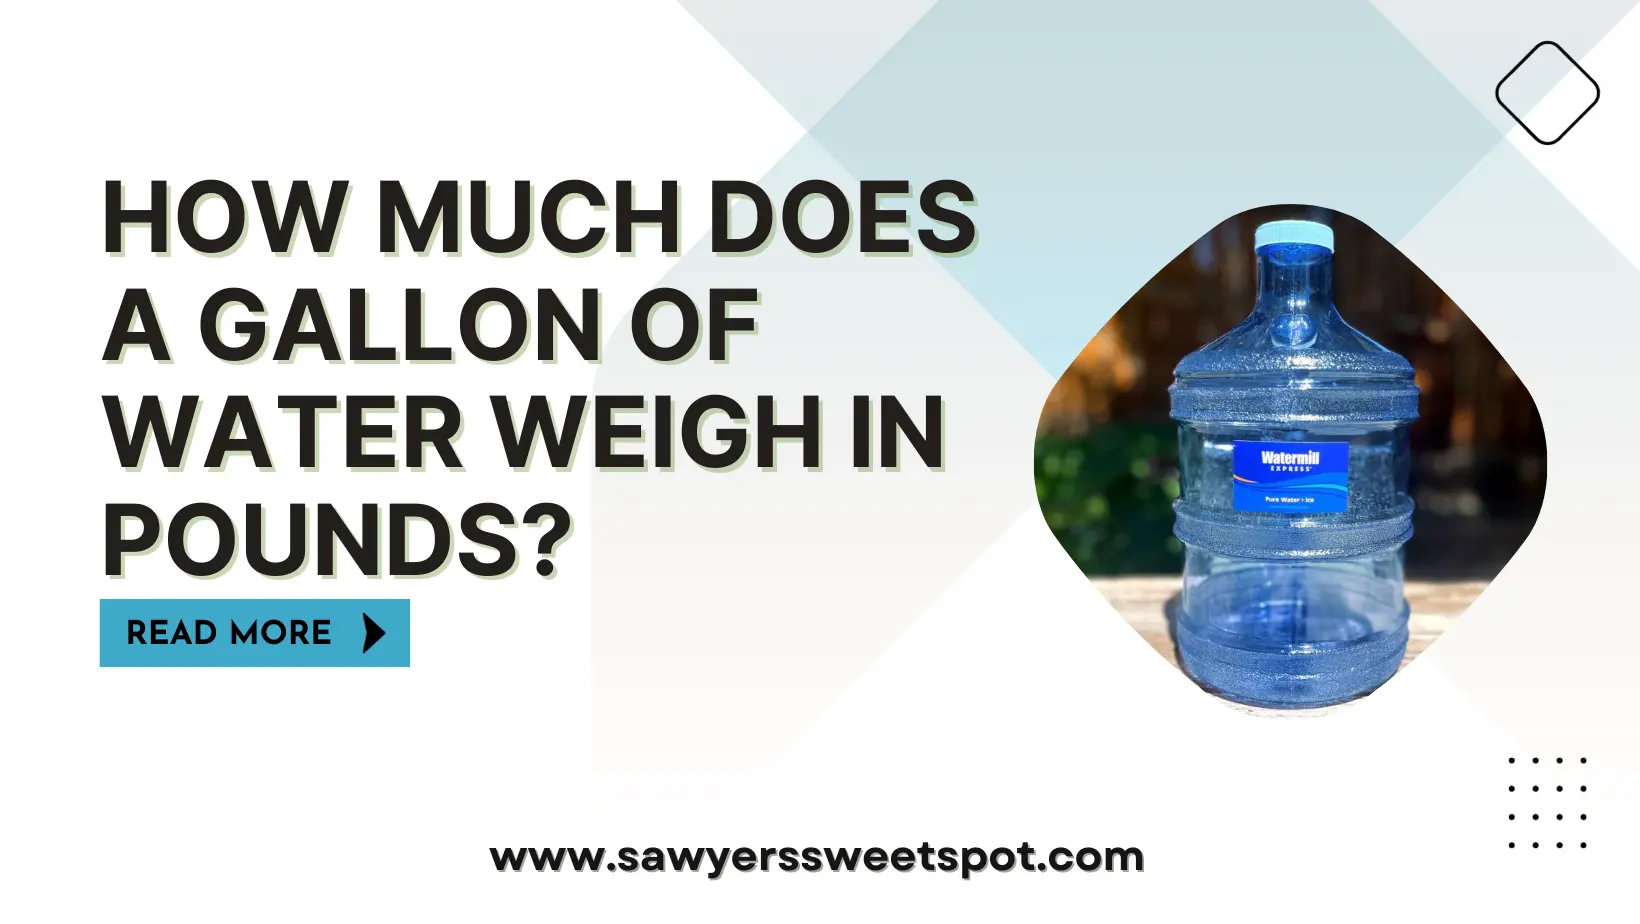 How Much does a Gallon of Water Weigh in Pounds?